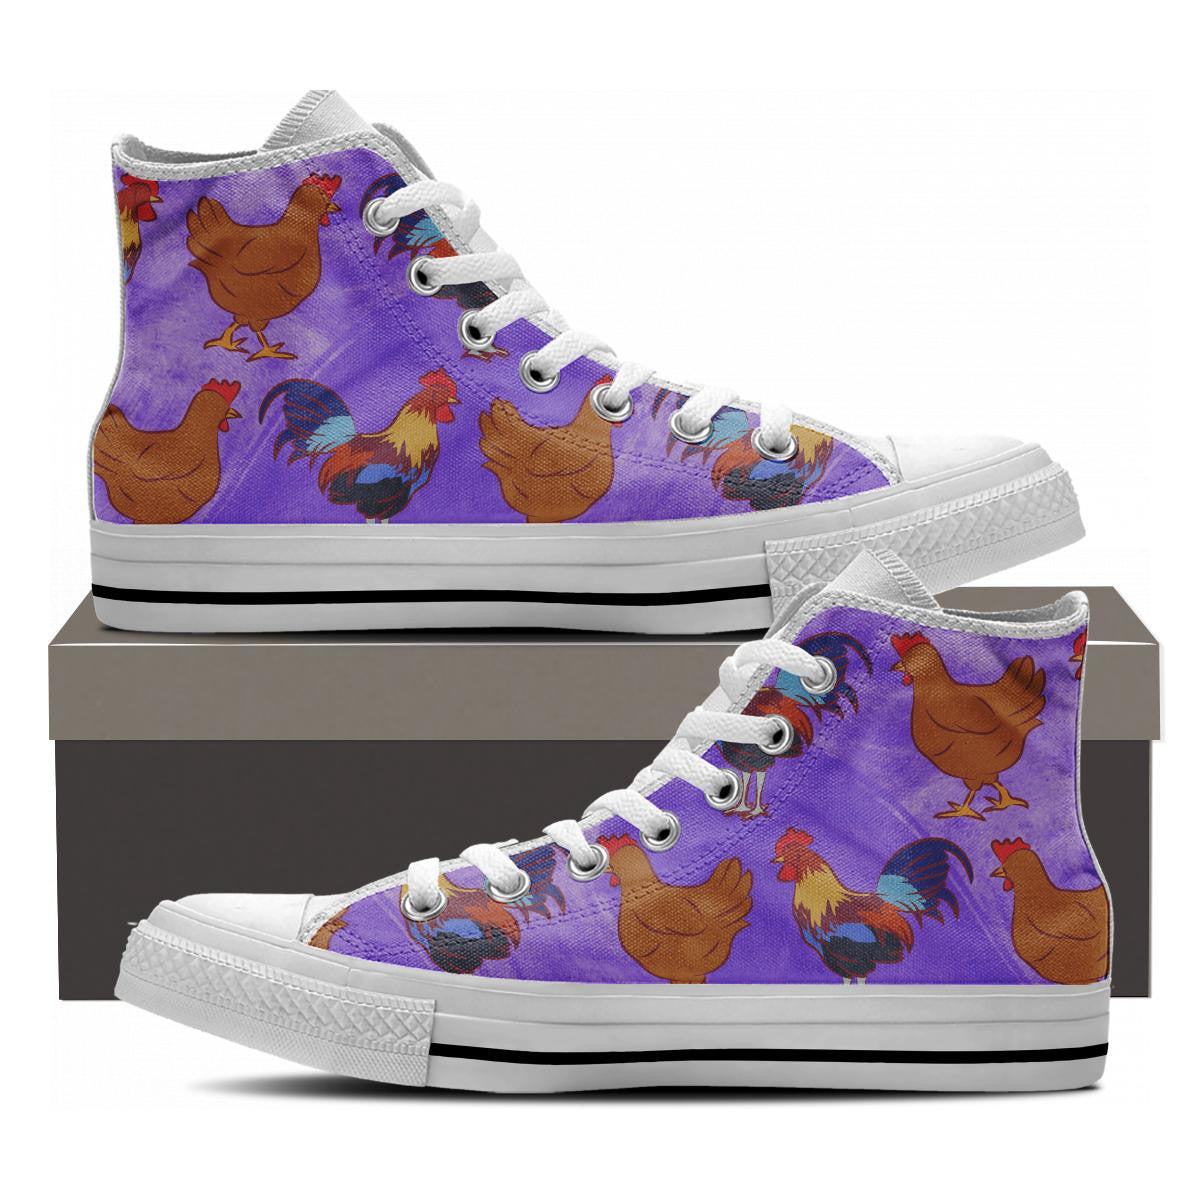 Chicken High Tops - Cool Tees and Things